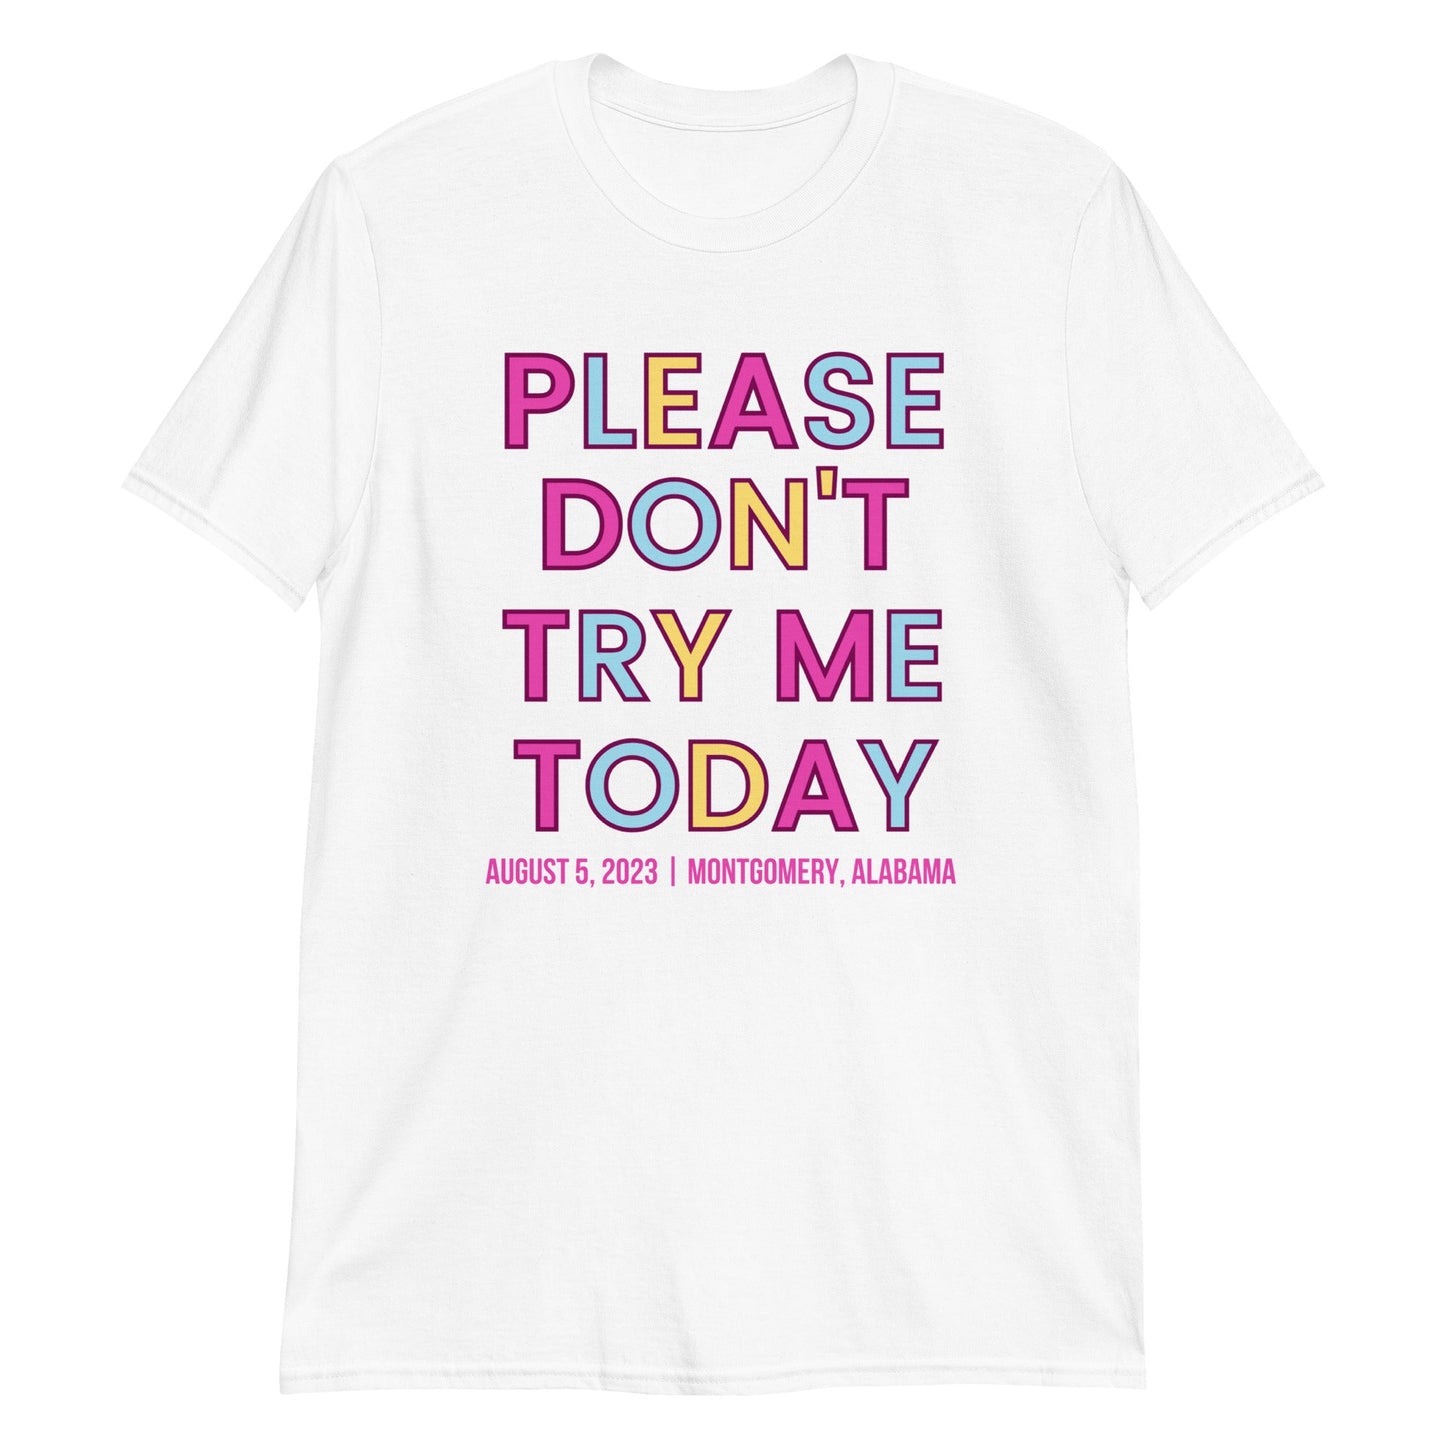 PLEASE DON'T TRY ME TODAY - ALABAMA EDITION 8/5/23 - Short-Sleeve Unisex T-Shirt | (For a Slim Fit Order a Size Down) - Catch This Tea Shirts